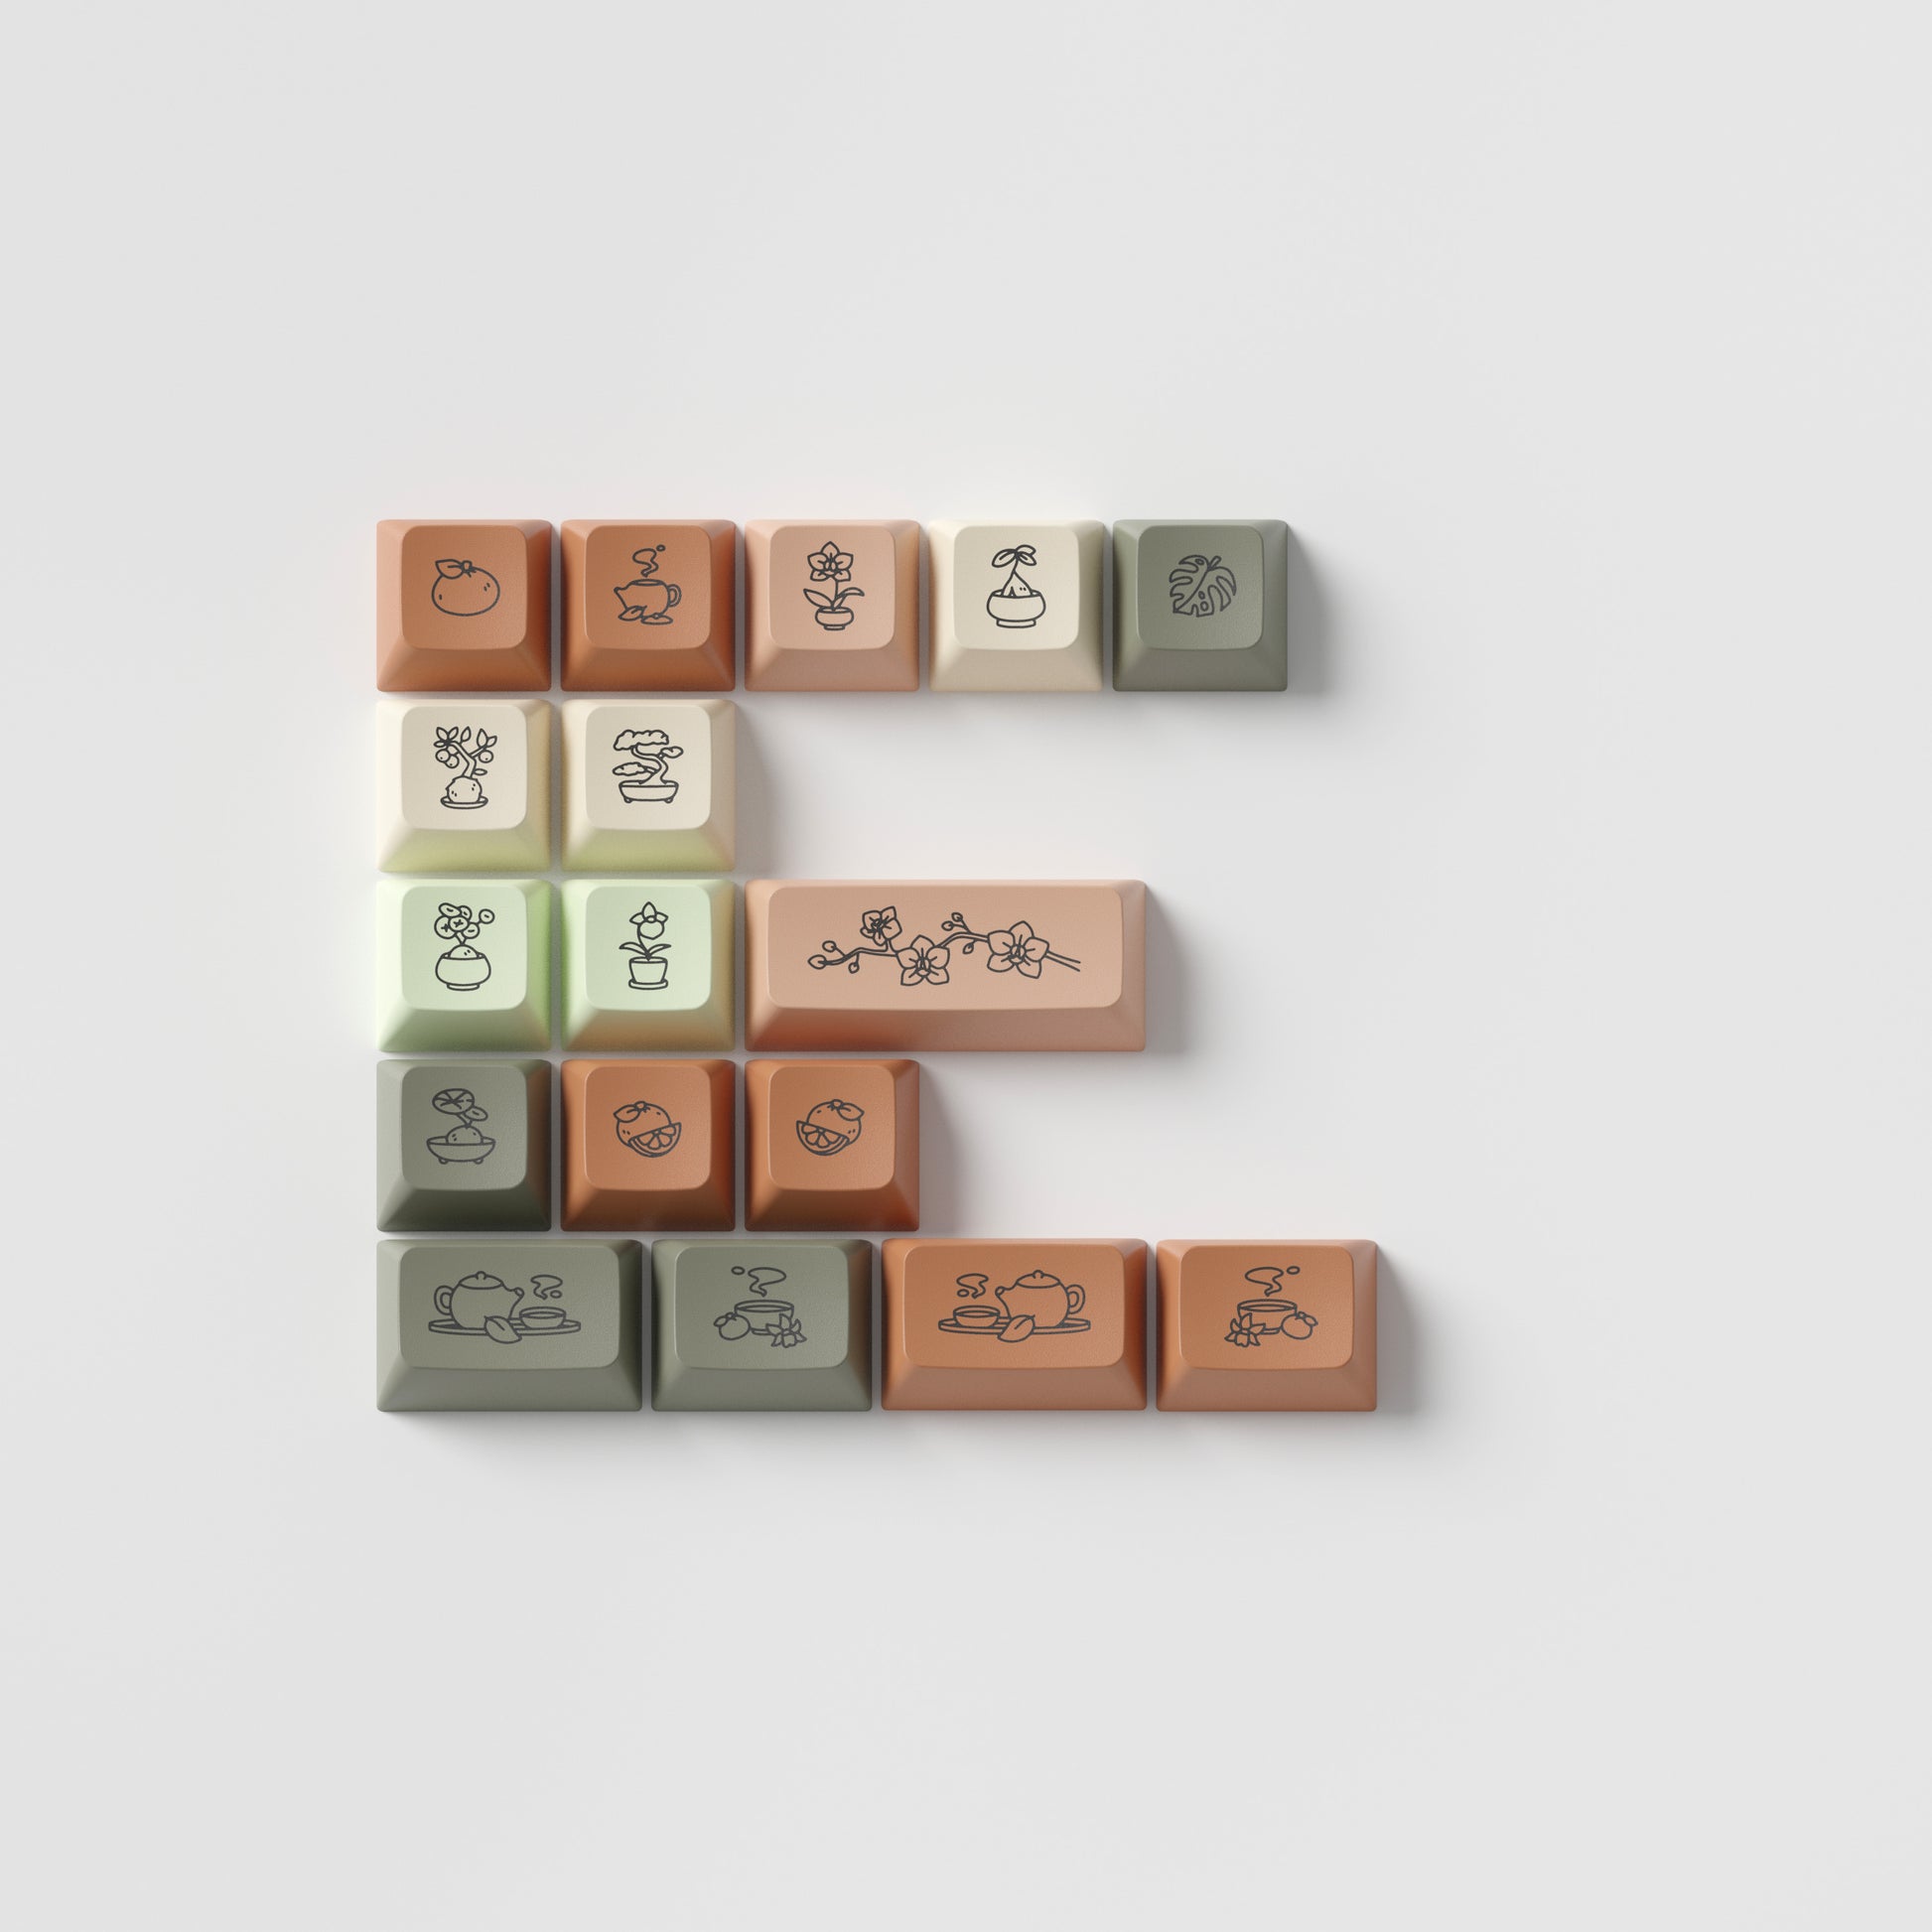 A set of 17 keycaps in earth tones with cute illustrations on them